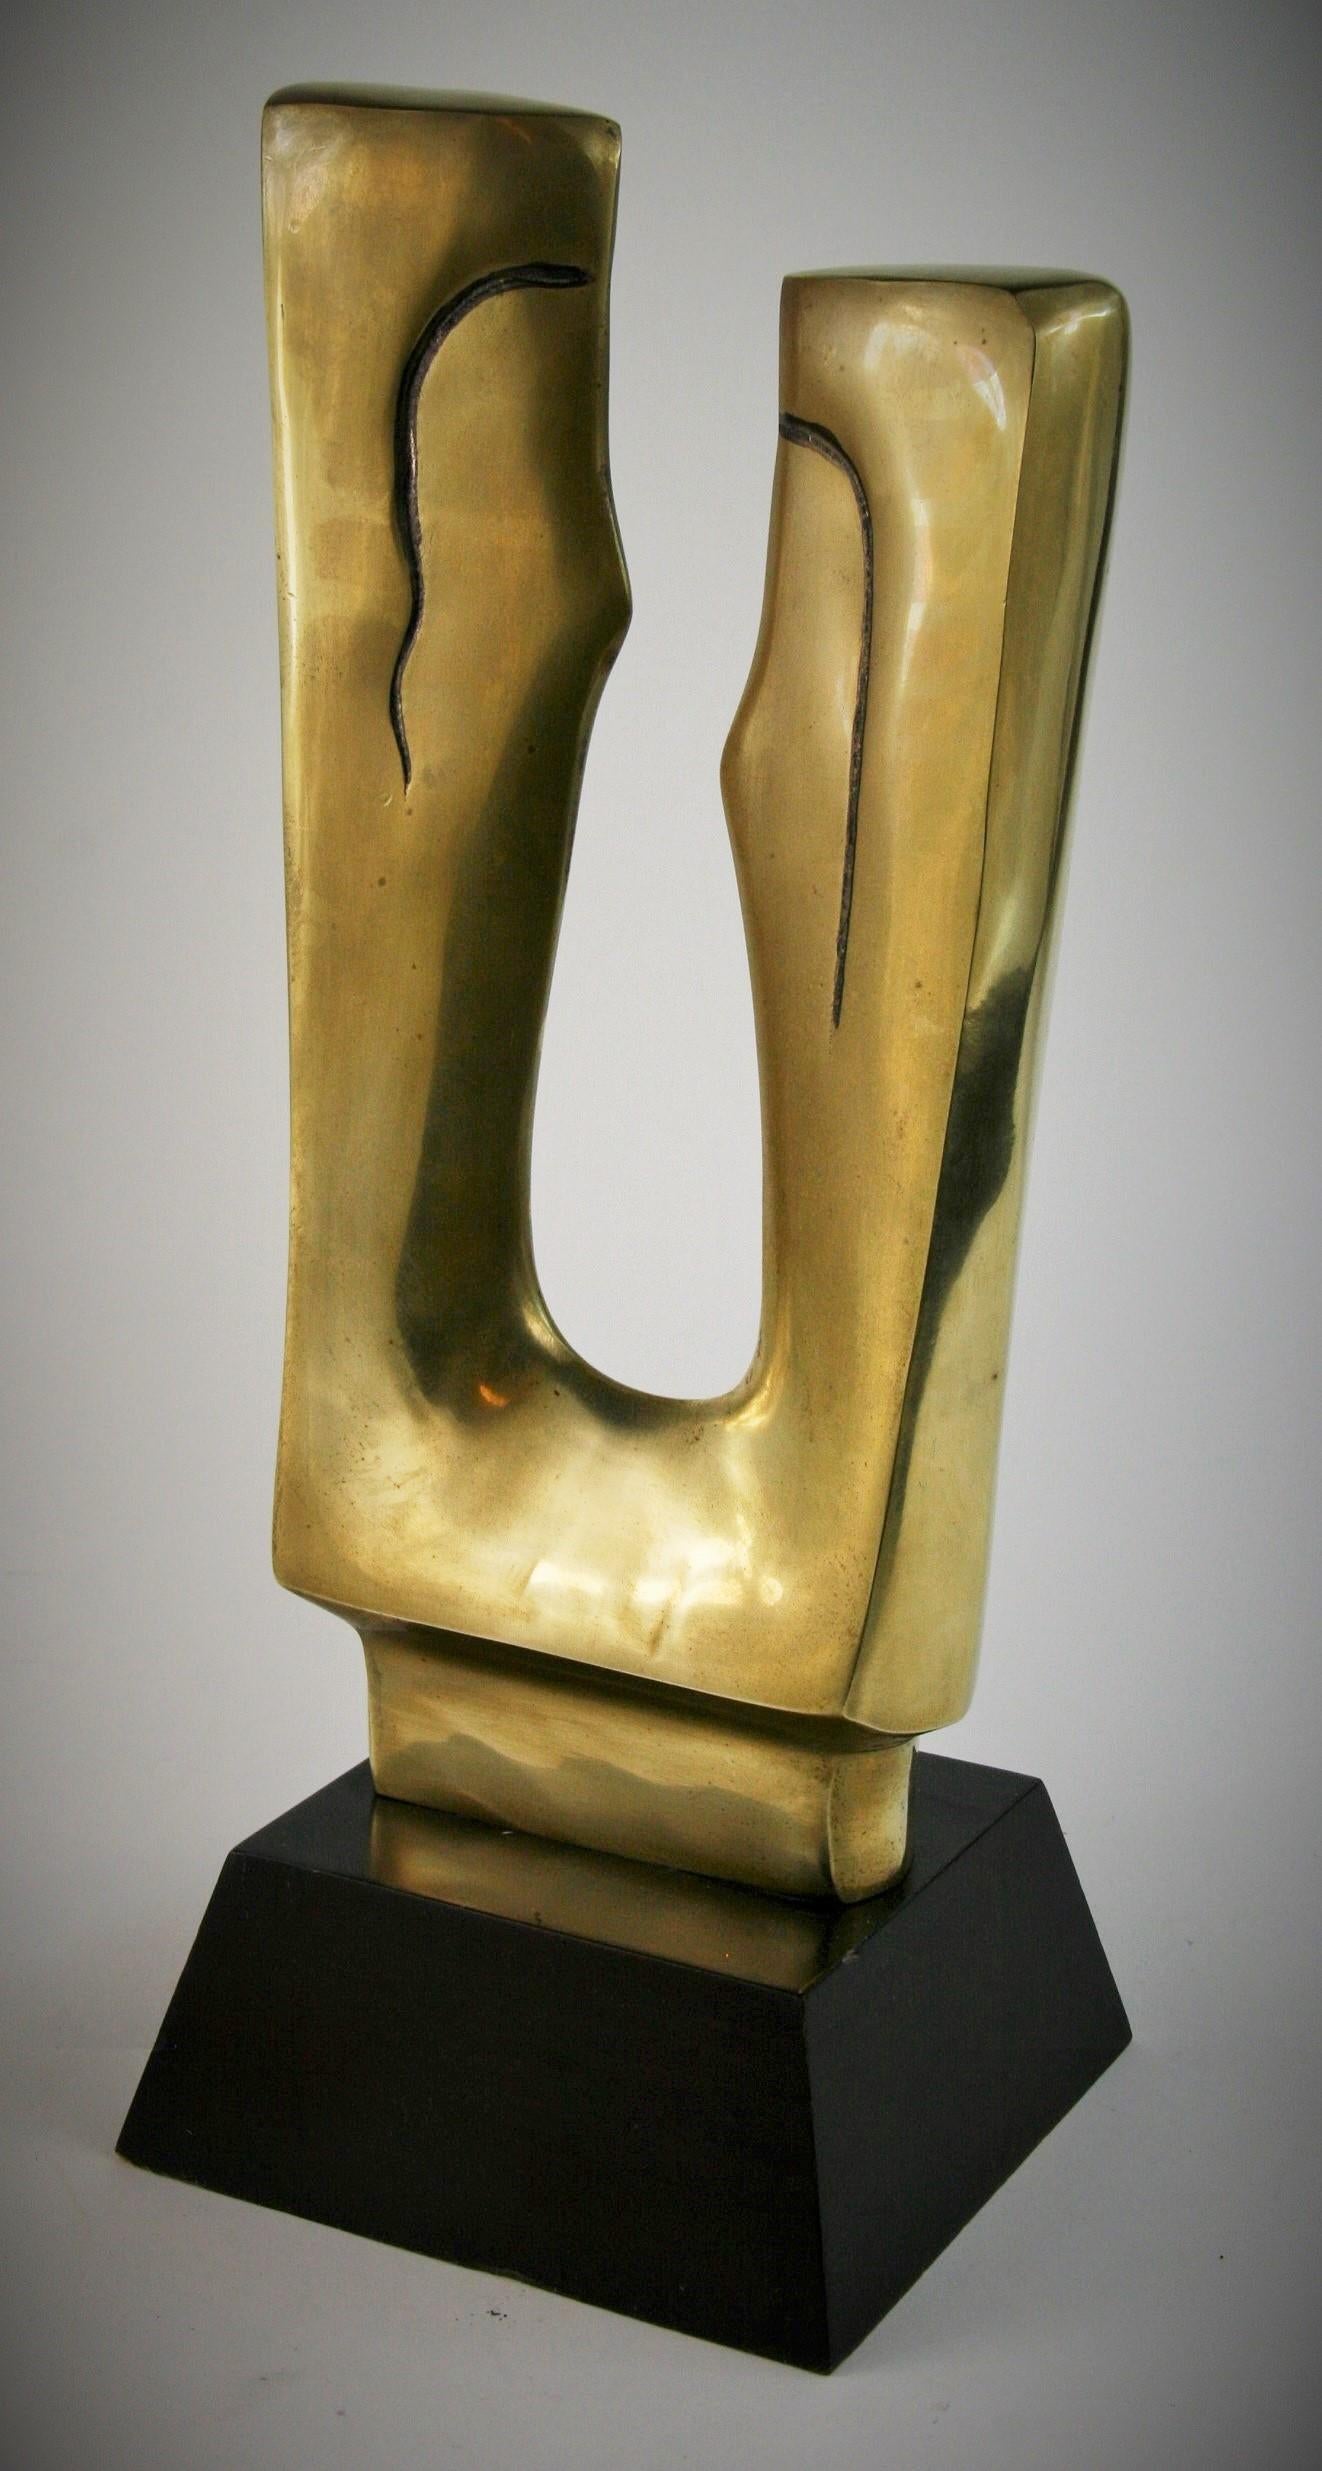 3-394 Large abstract sculpture of a man and woman on wood base